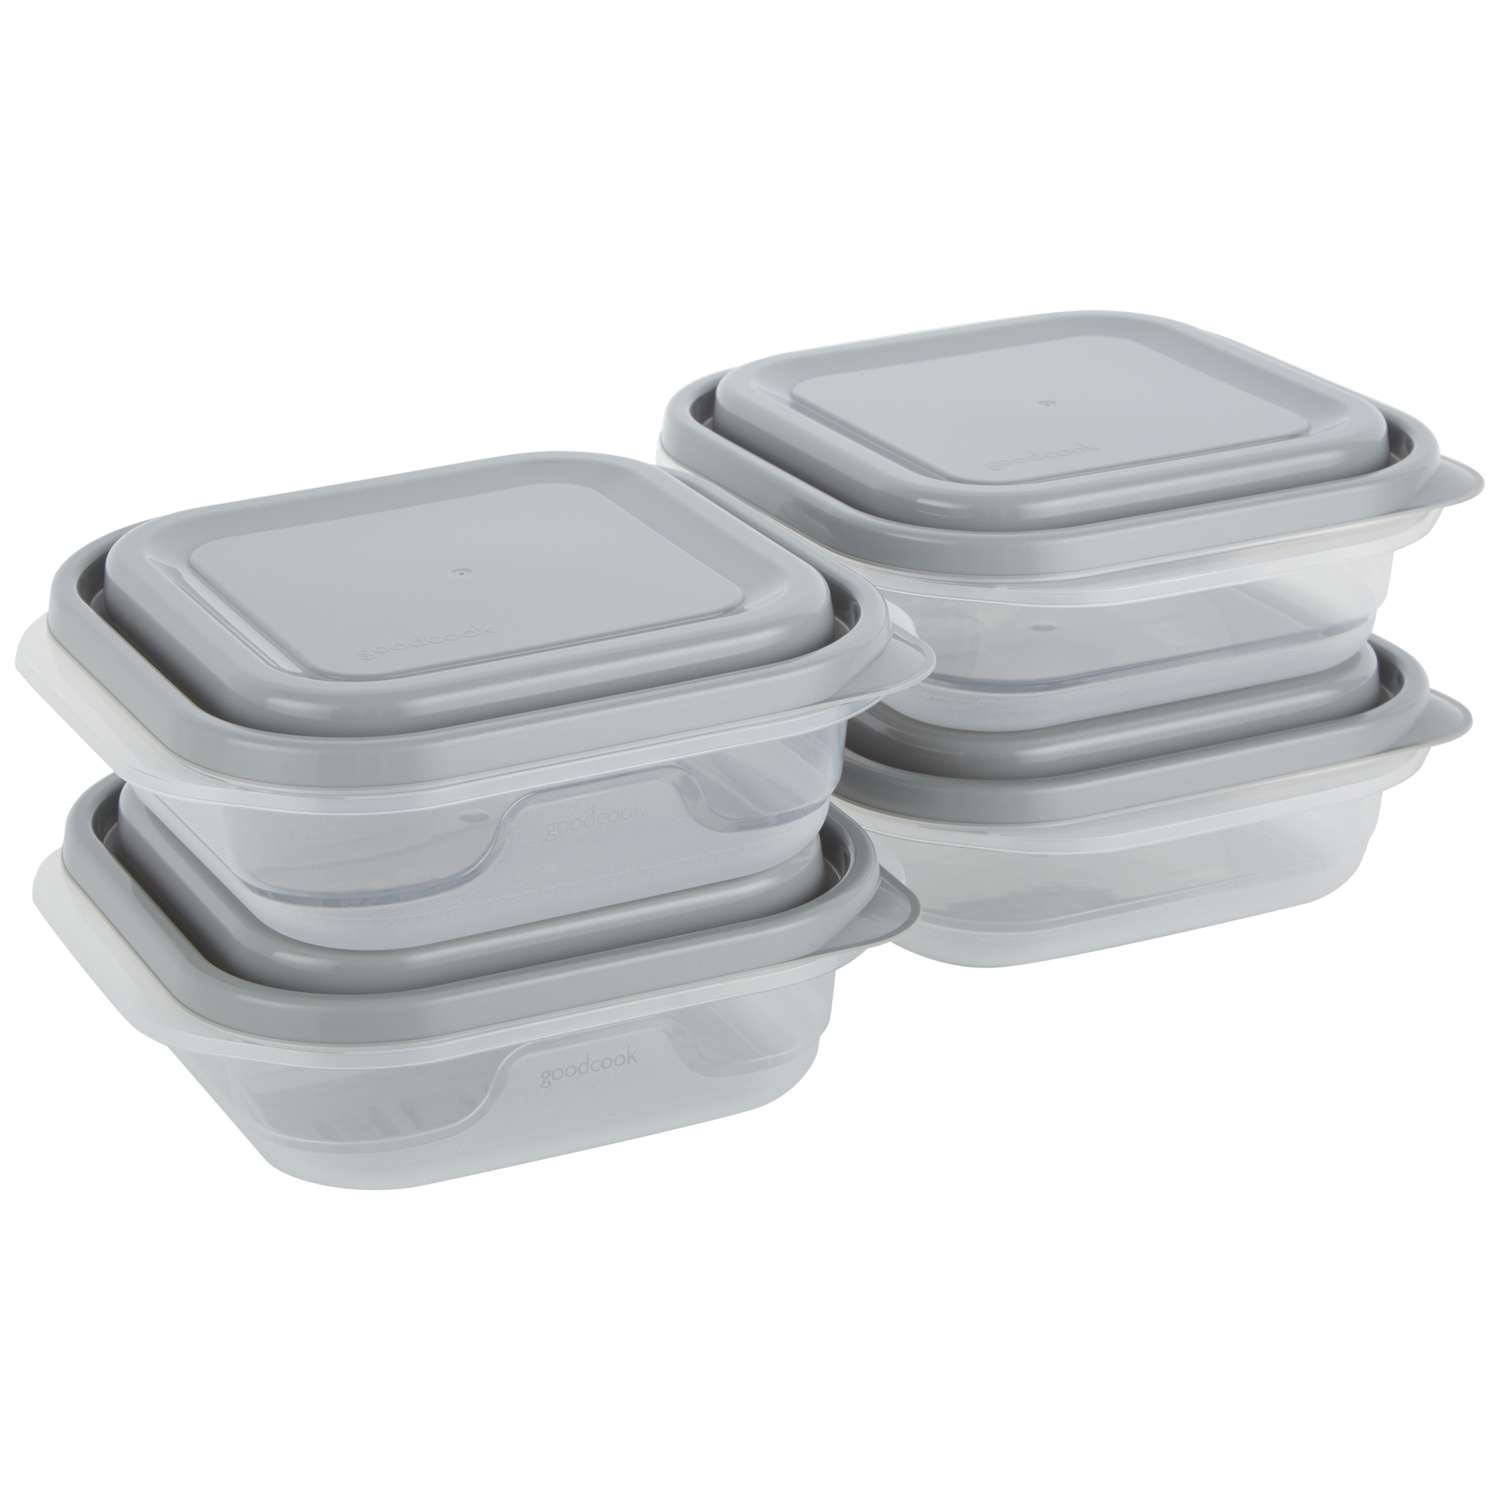 GoodCook Everyware Round Food Storage Containers Extra Large (2 ct)